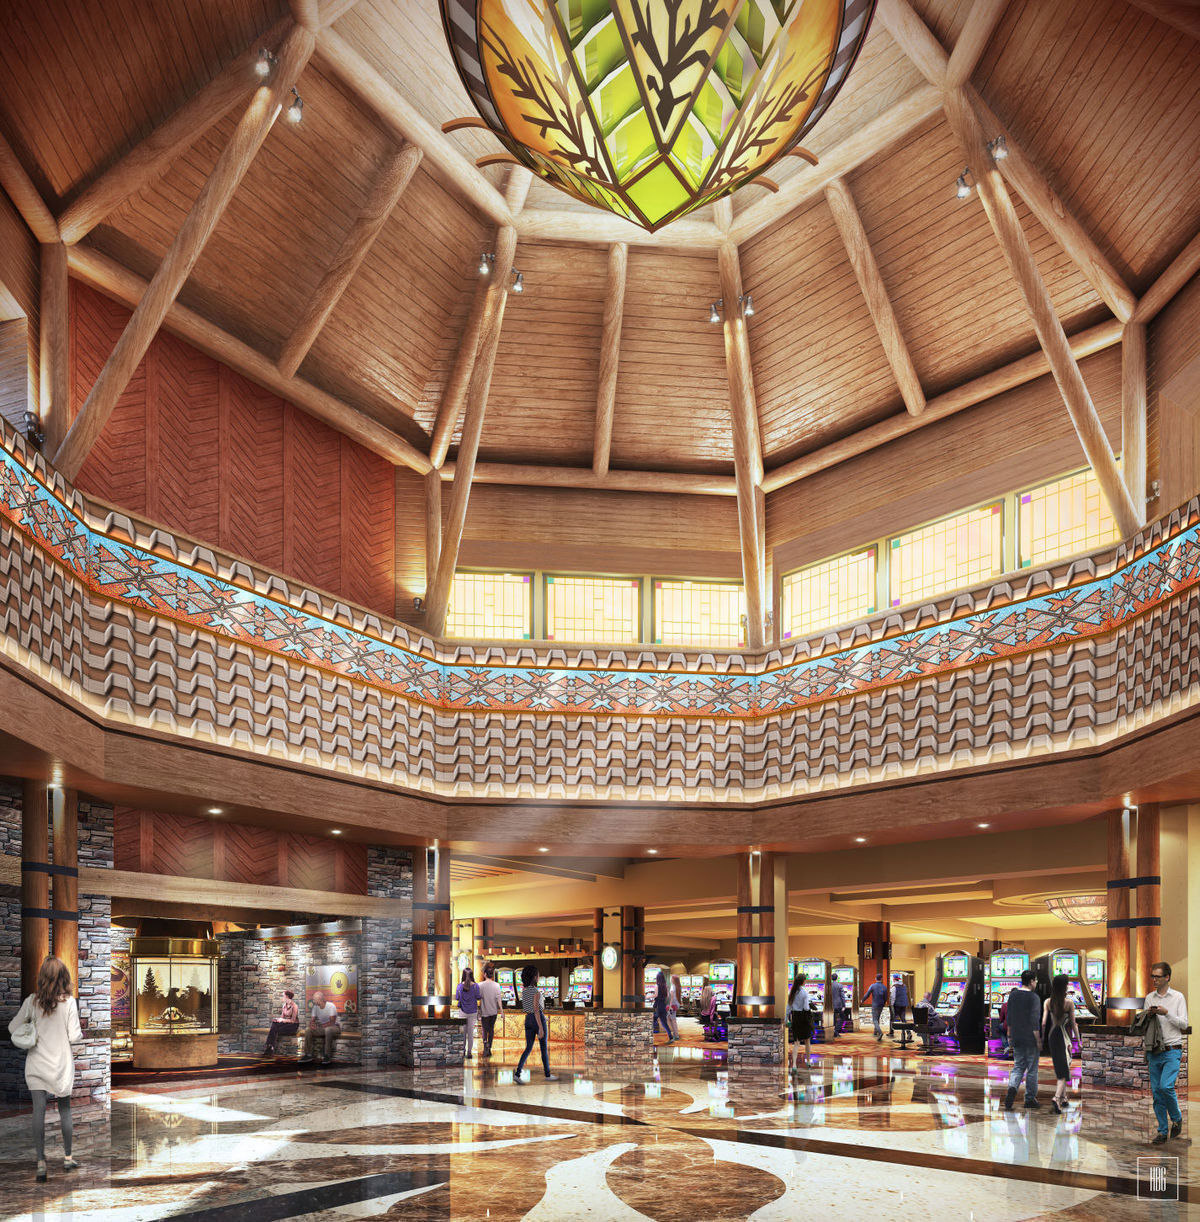 Indiana's first Native American owned casino opens